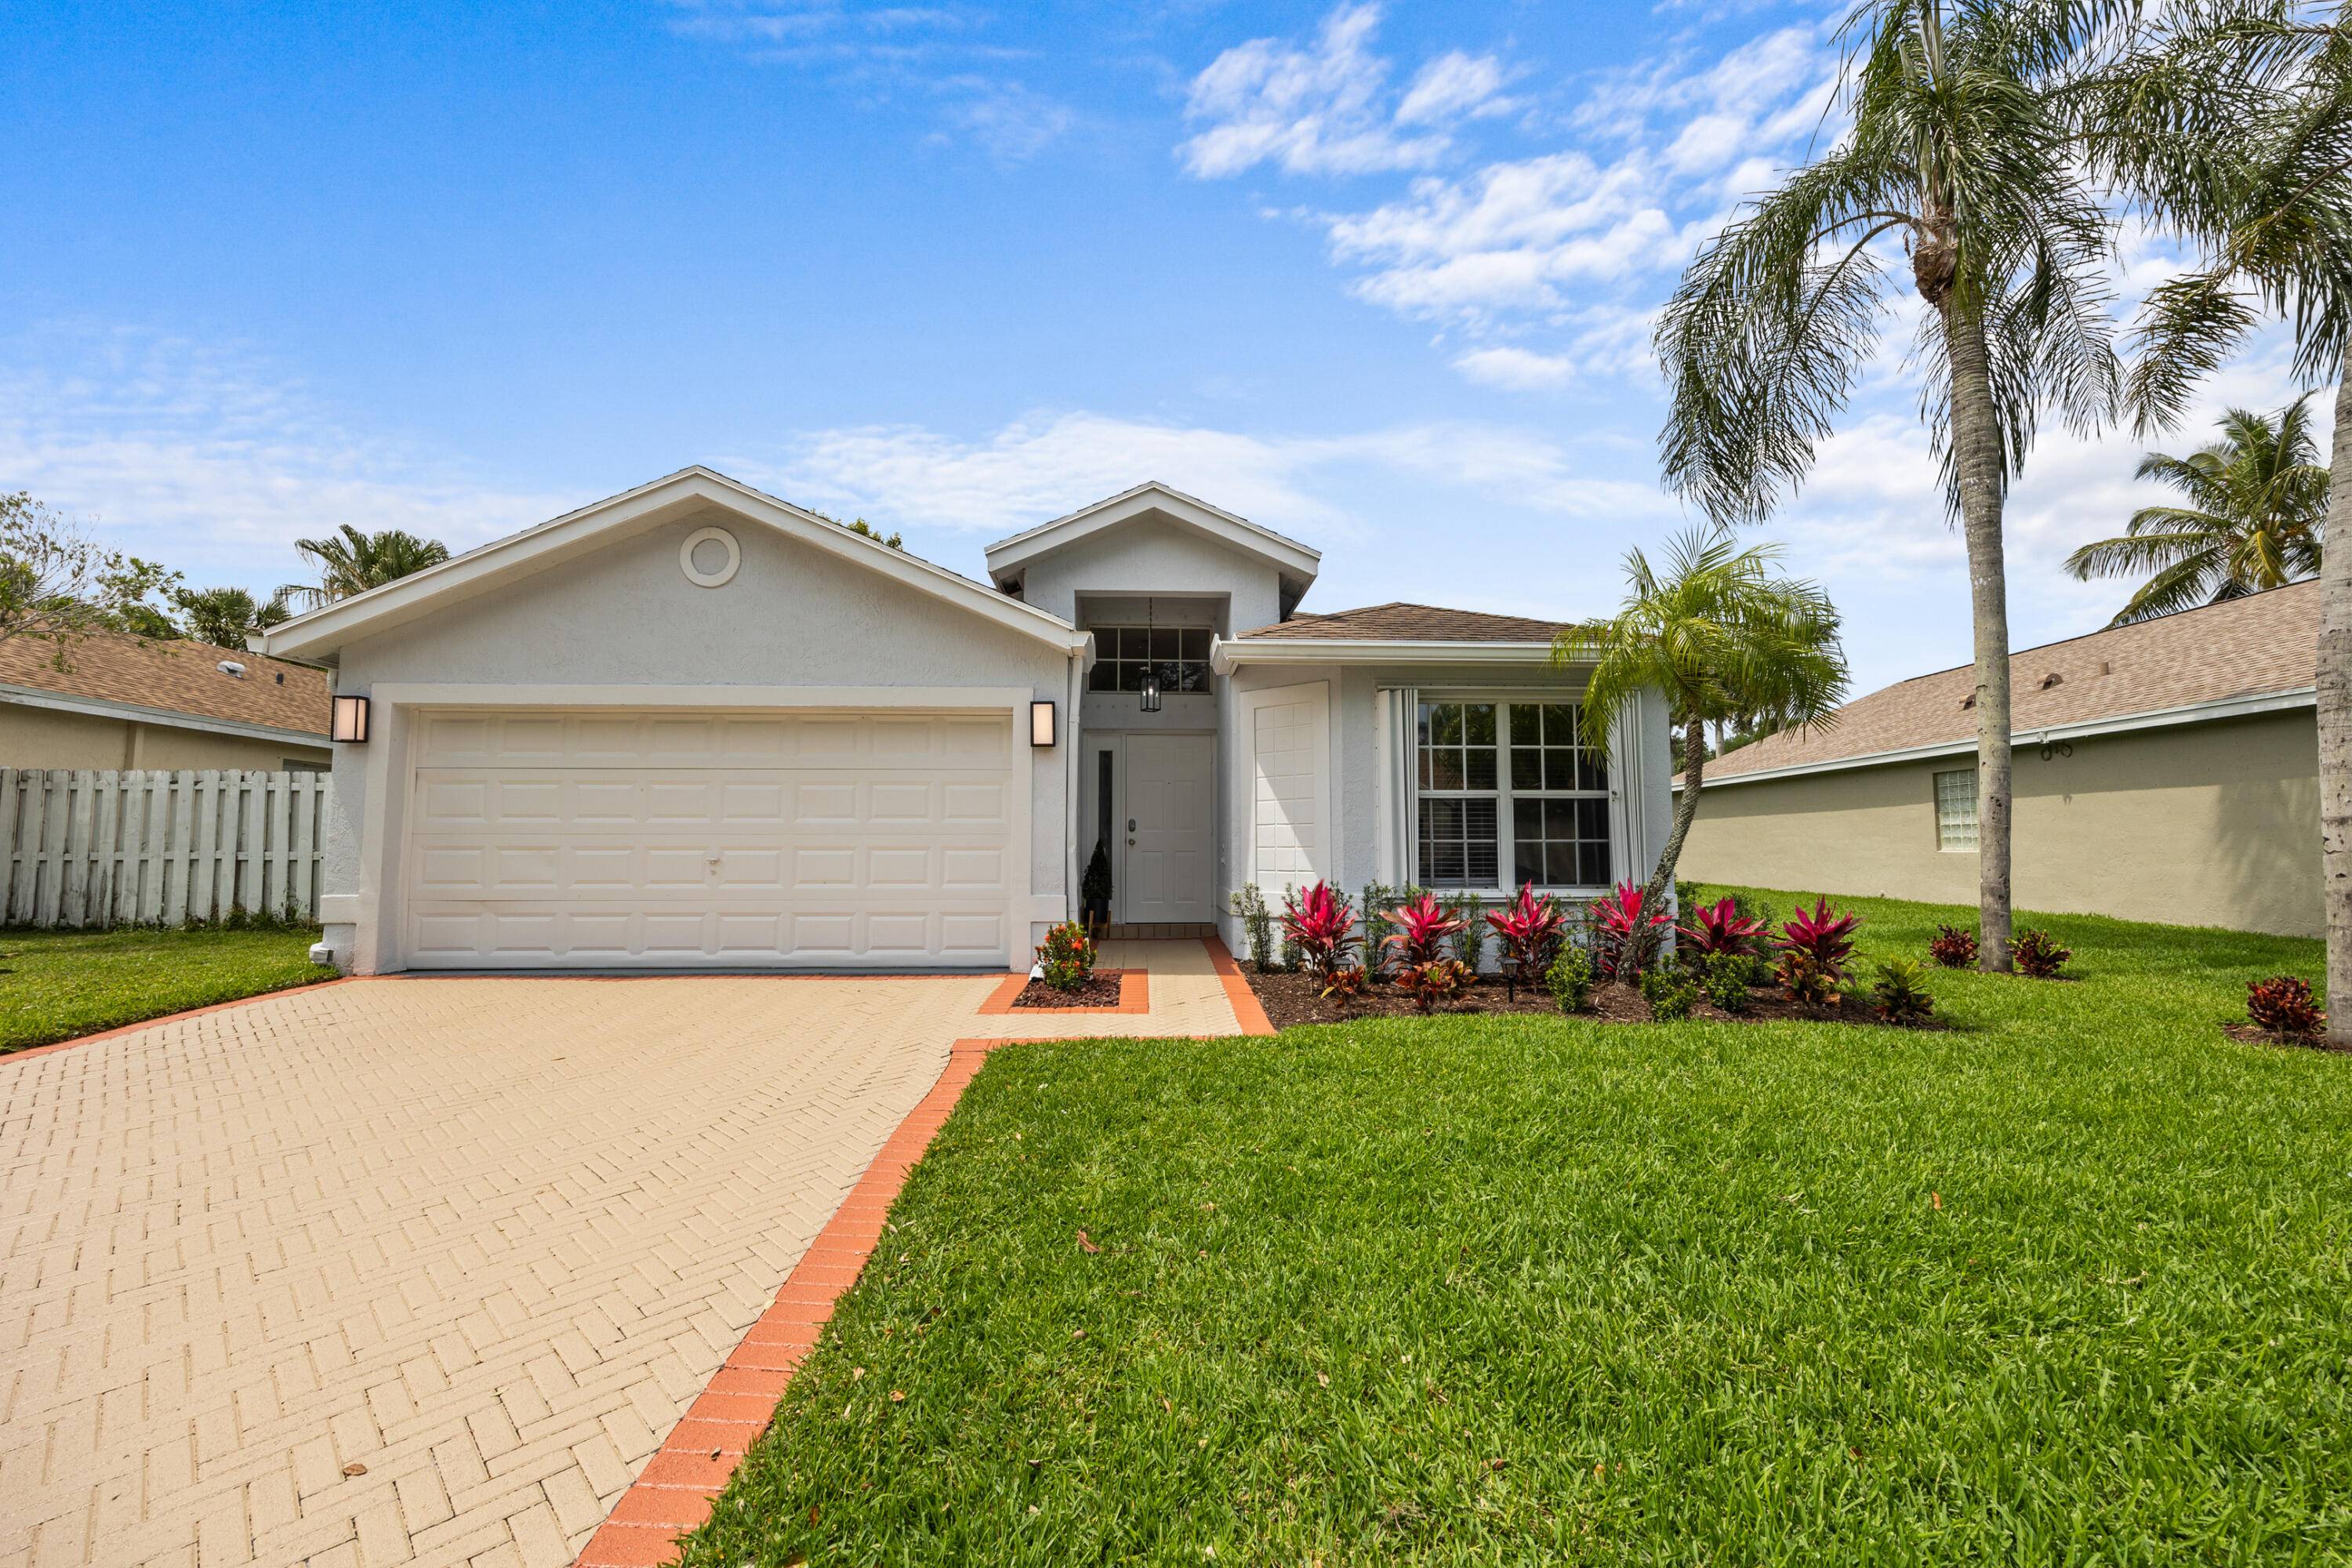 Welcome to your new home in the prestigious gated community with low HOA fees !